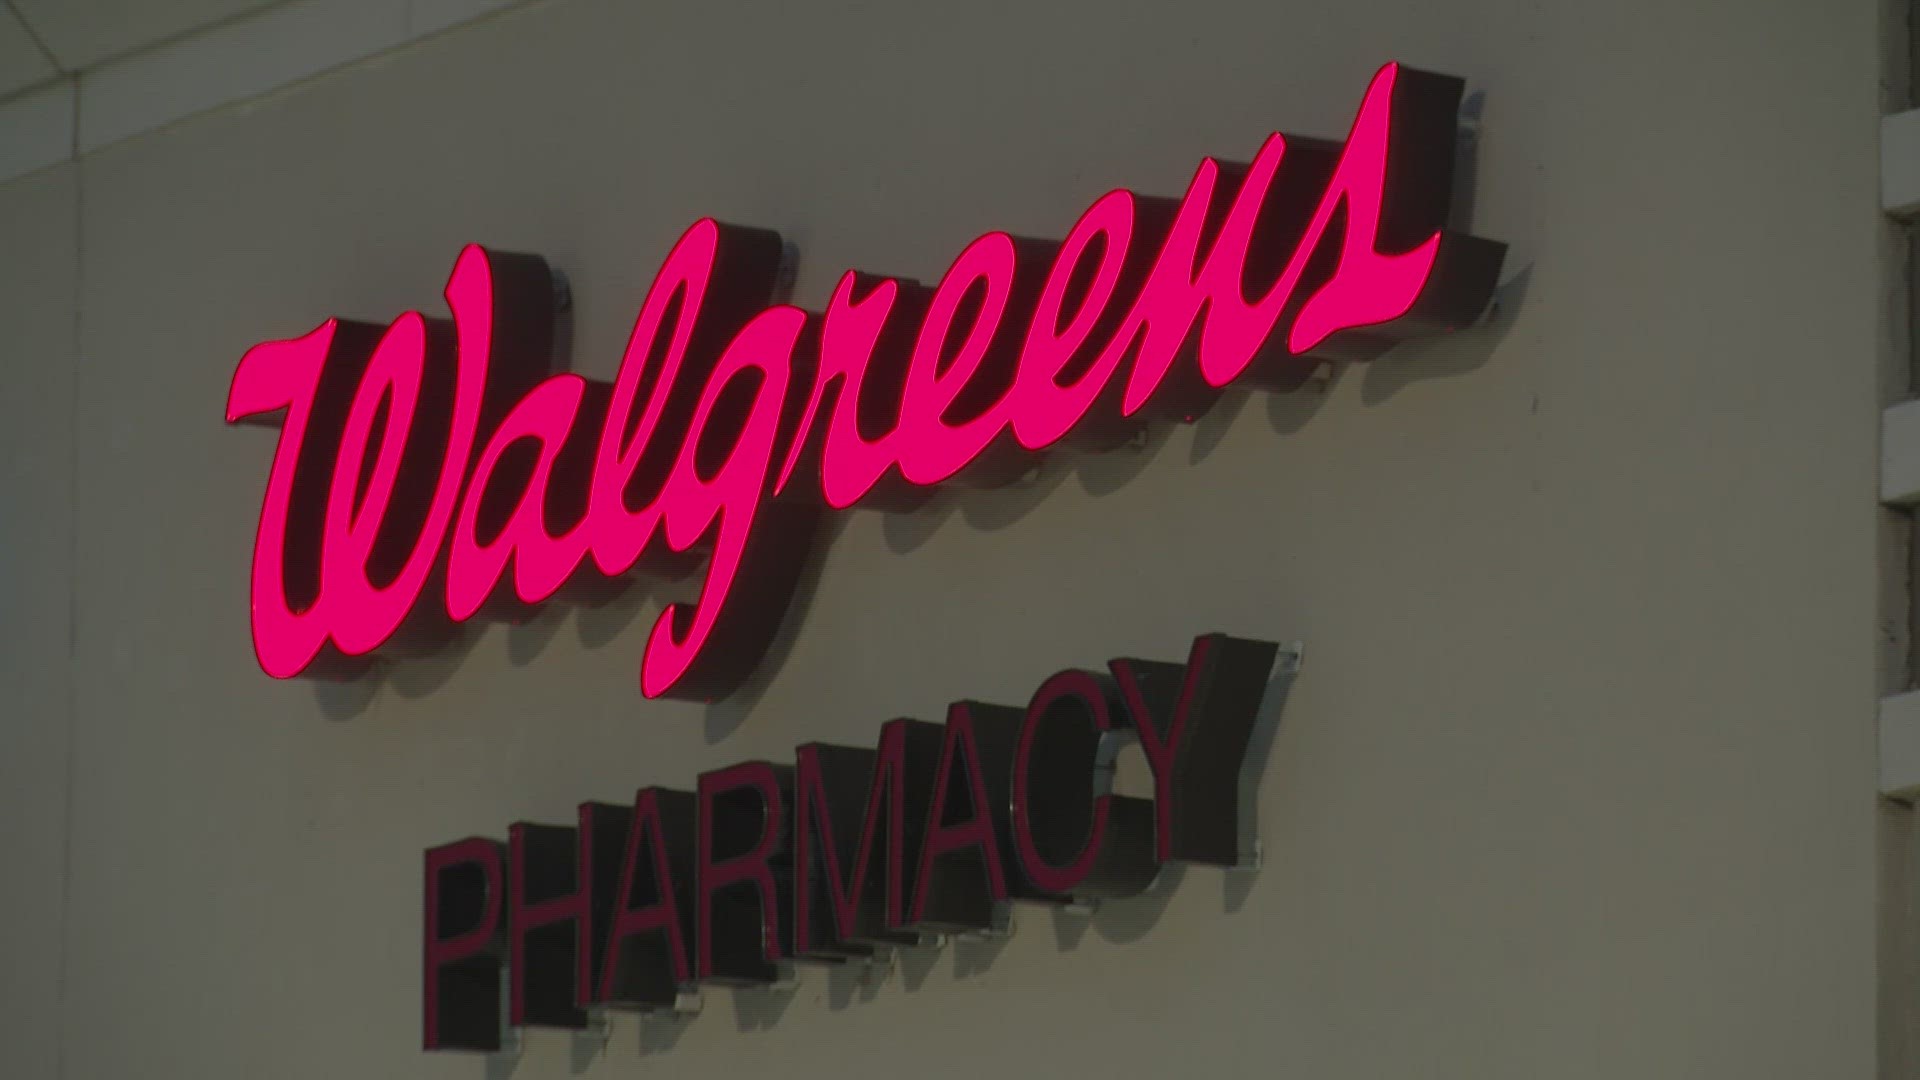 A Walgreens pharmacist said lately, there has only been one pharmacist per shift, whereas before, they had two or even three per shift.